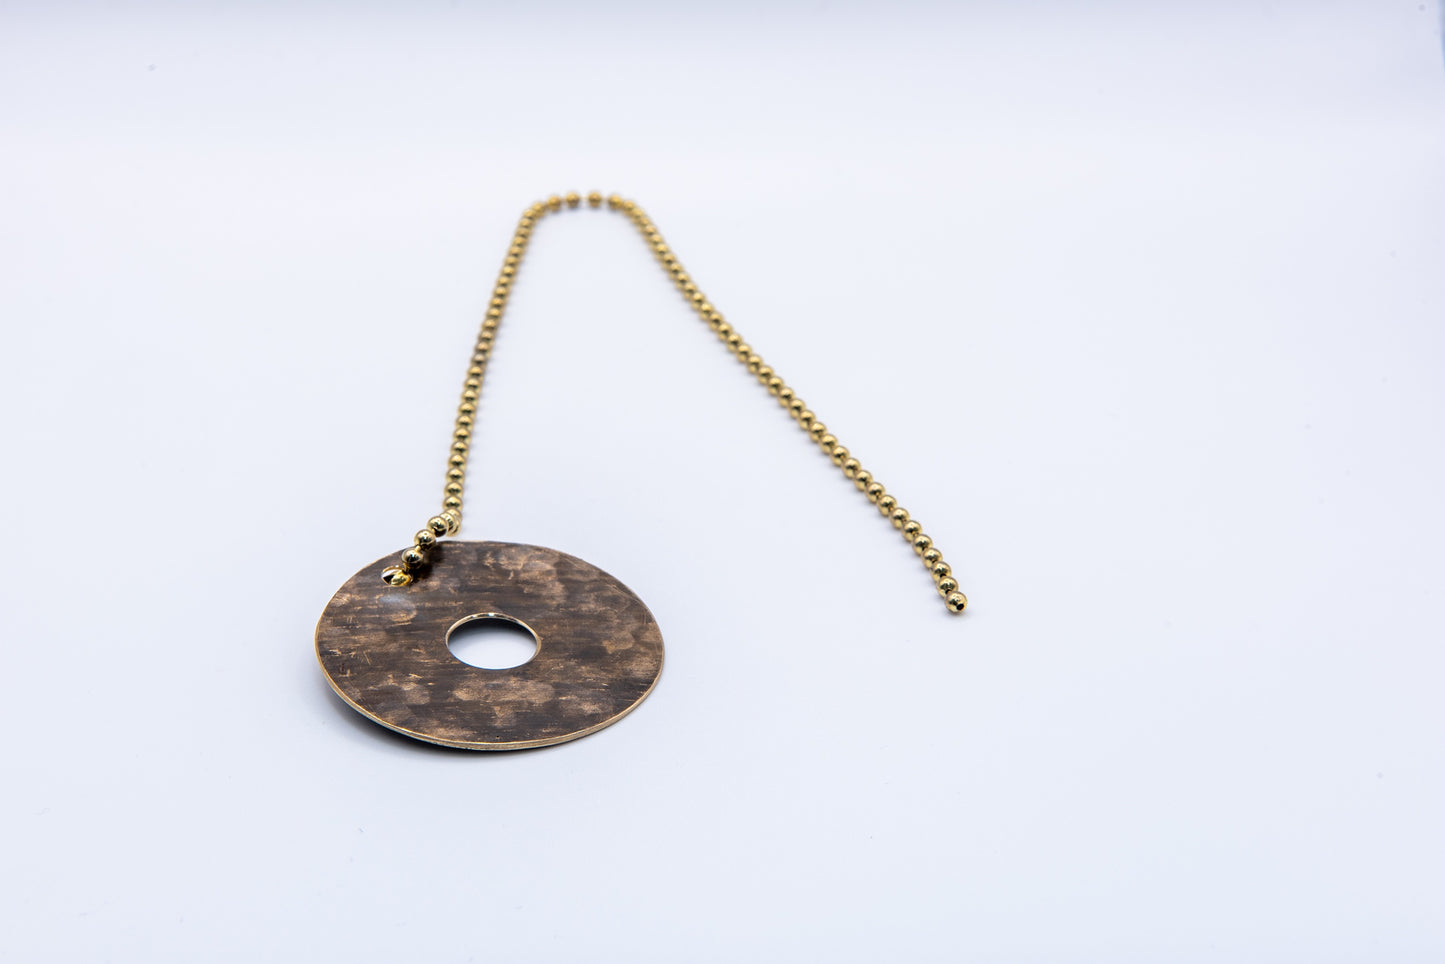 Cymbal Sizzle Chain / Beads